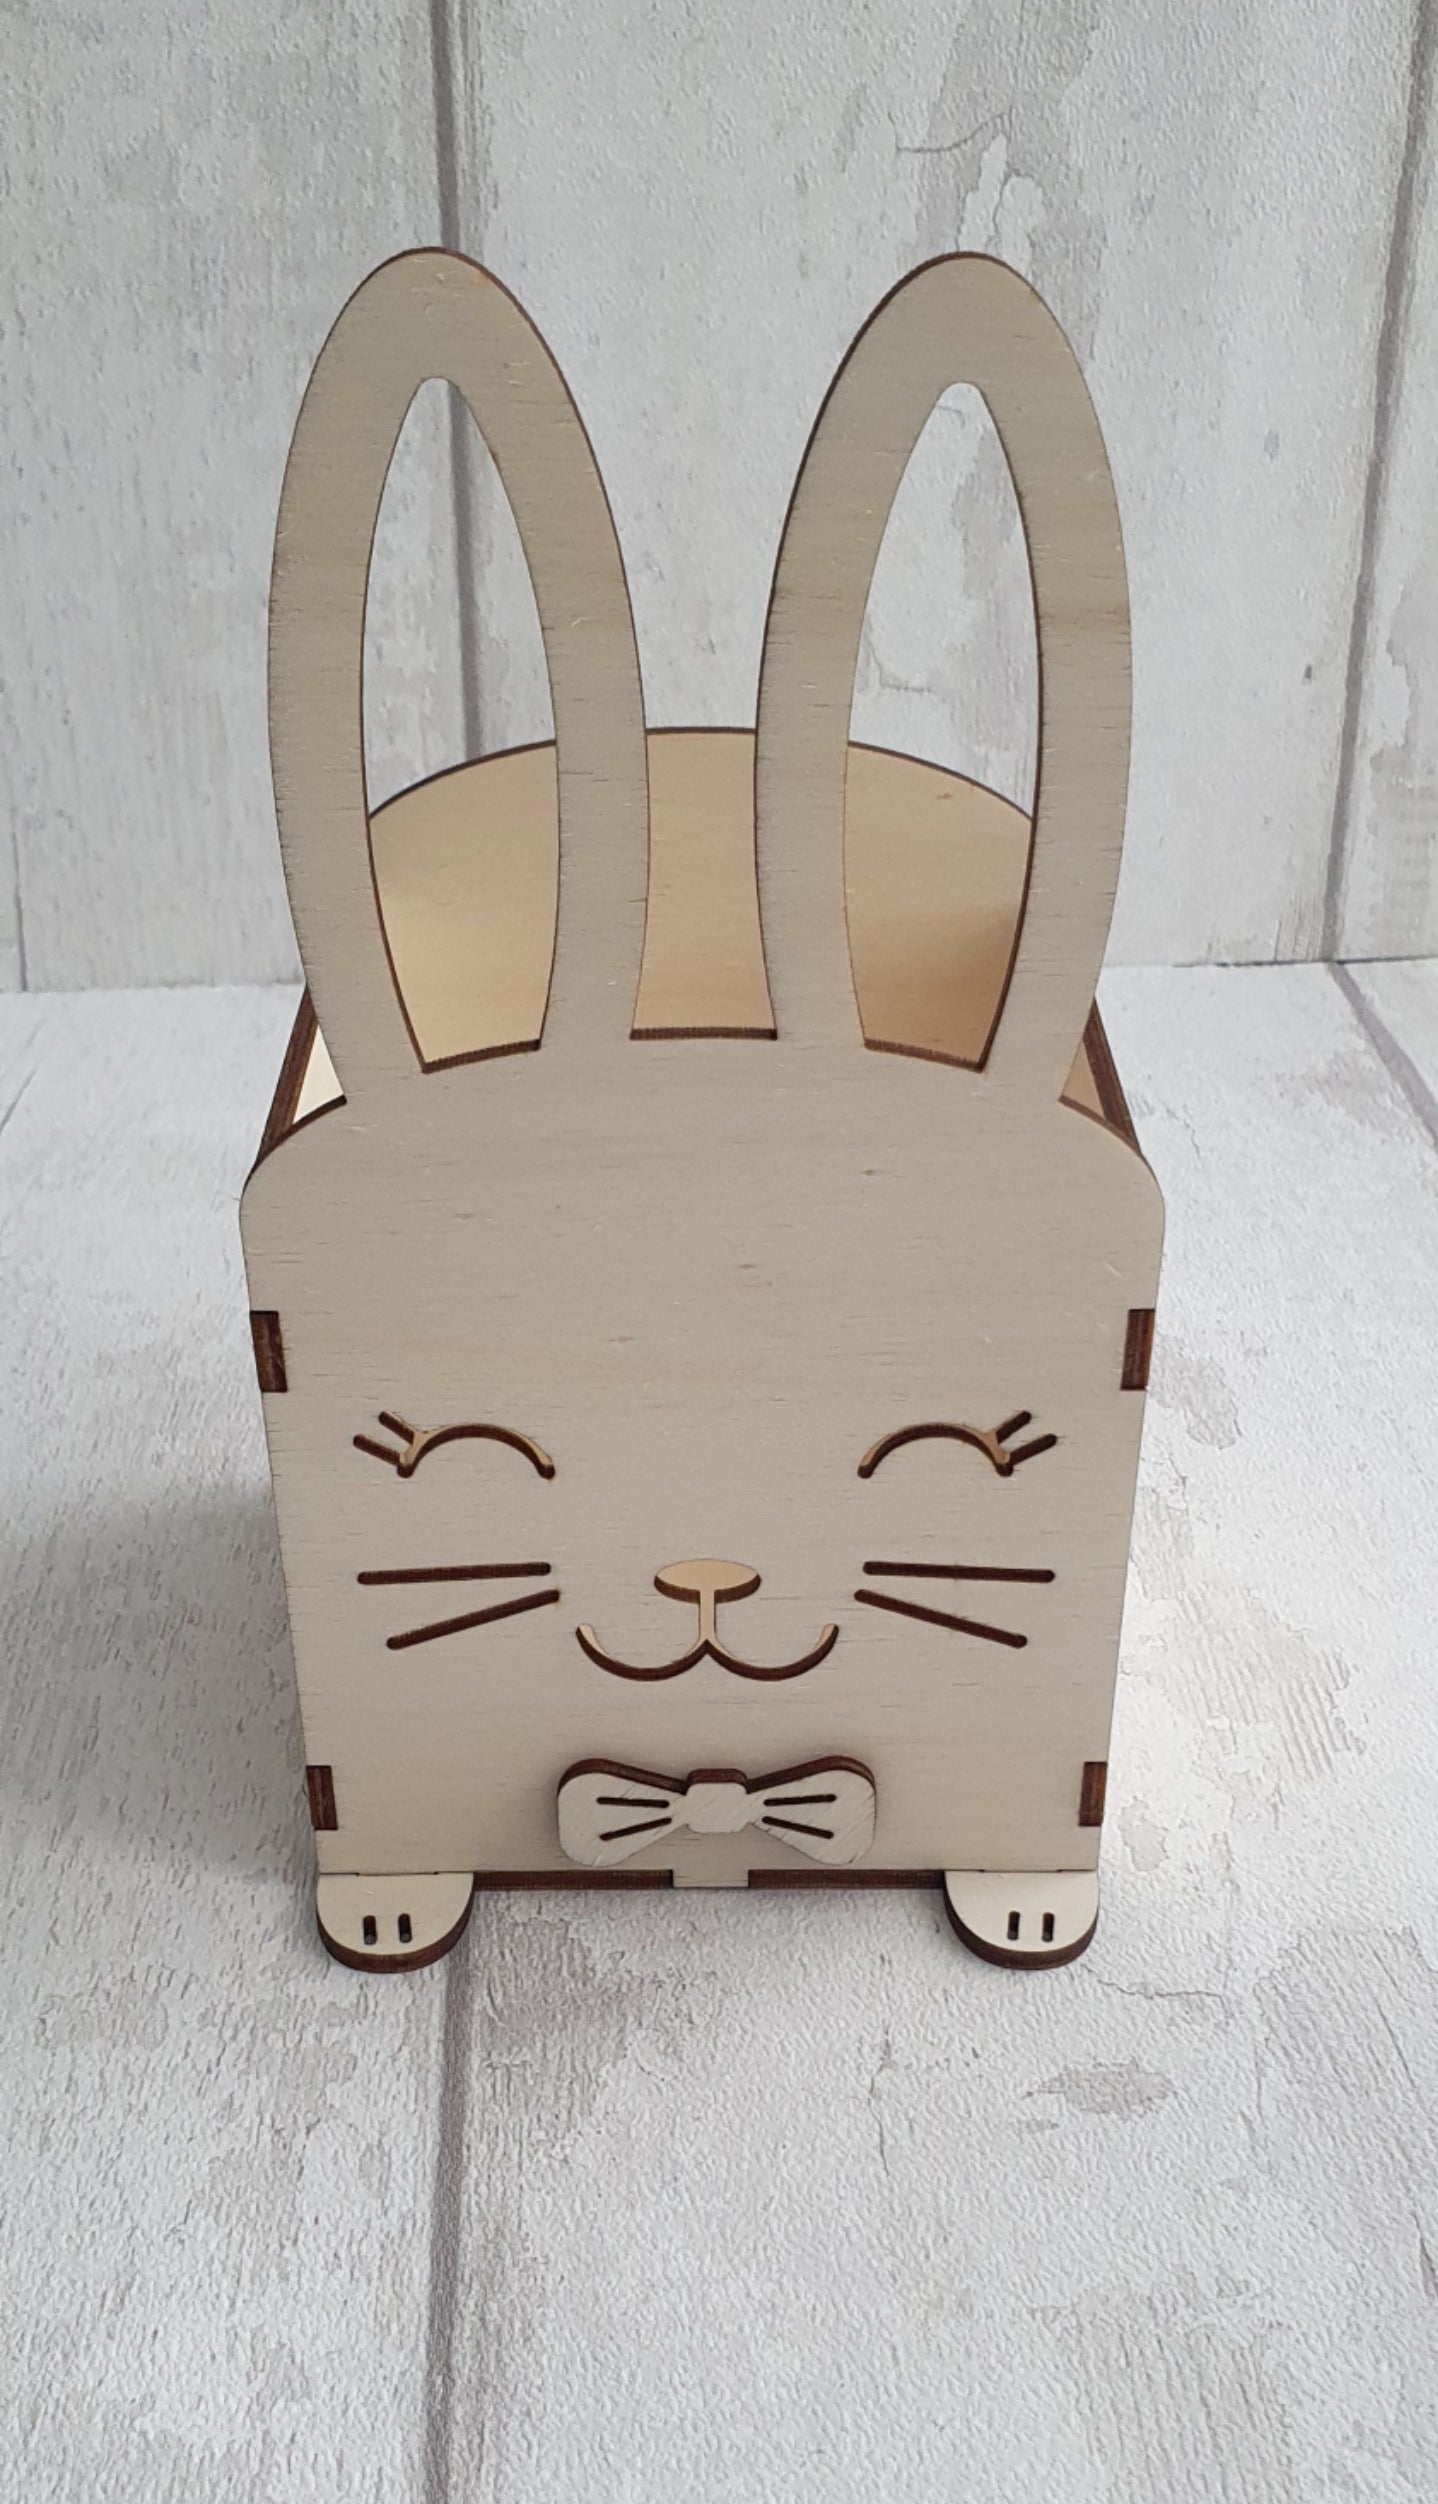 Personalised wooden Easter bunny basket.